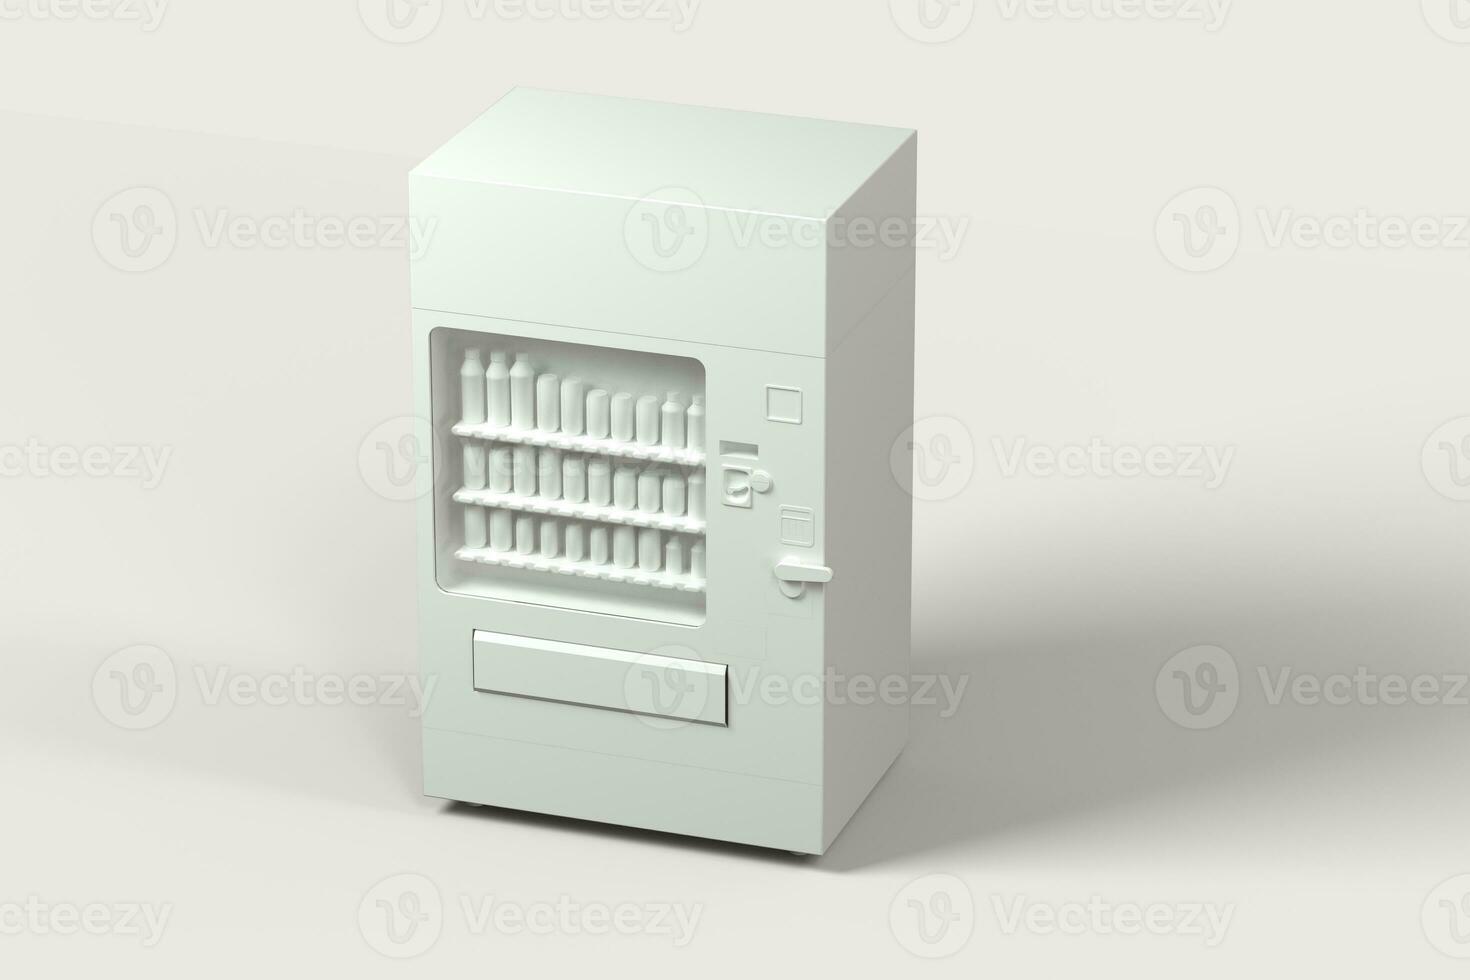 The white model of vending machine with white background, 3d rendering. photo